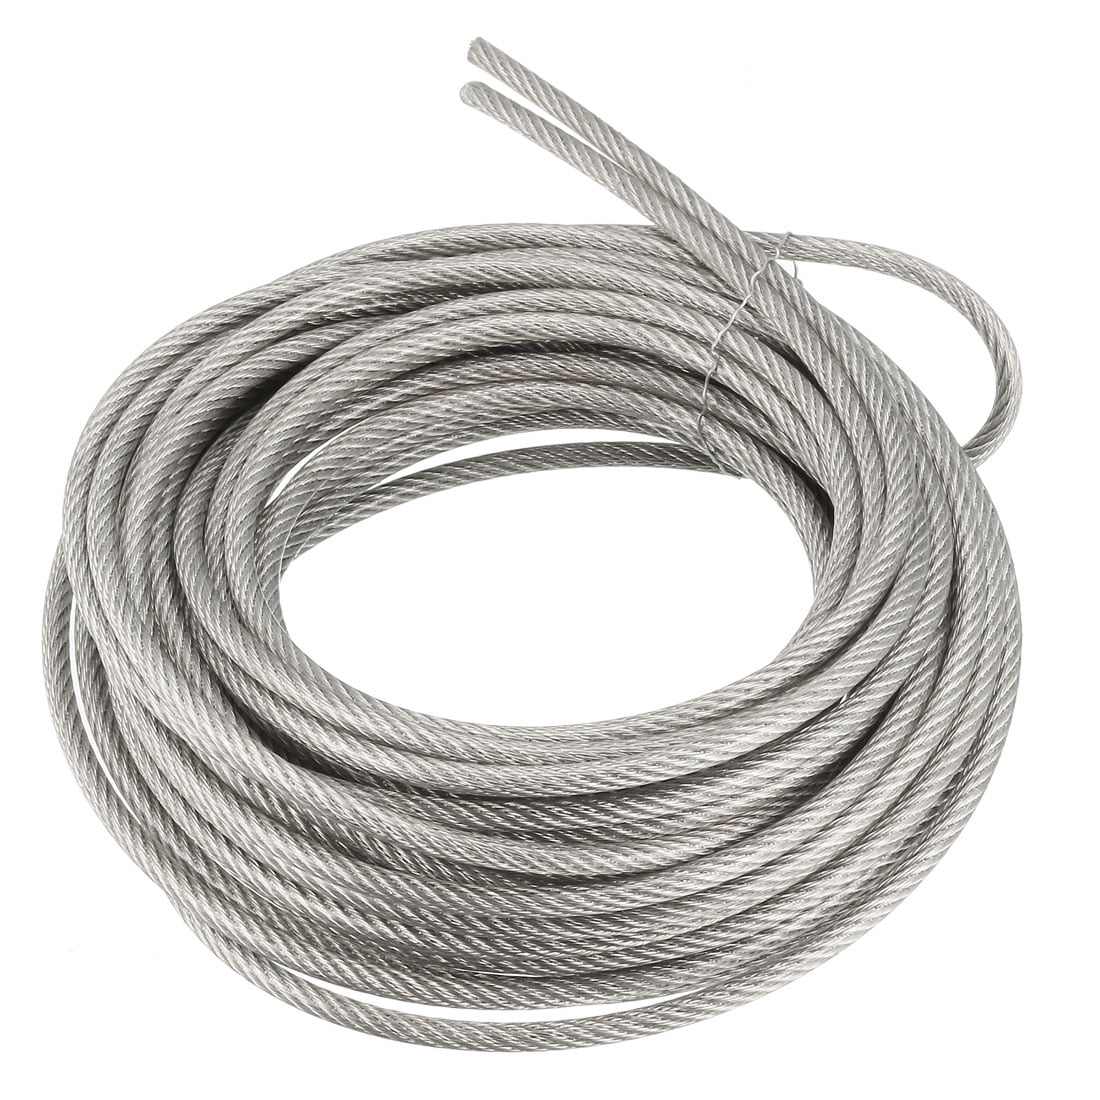 2.5mm 7x19 Stainless Steel T316 Cable Wire Rope 25' 3/32"